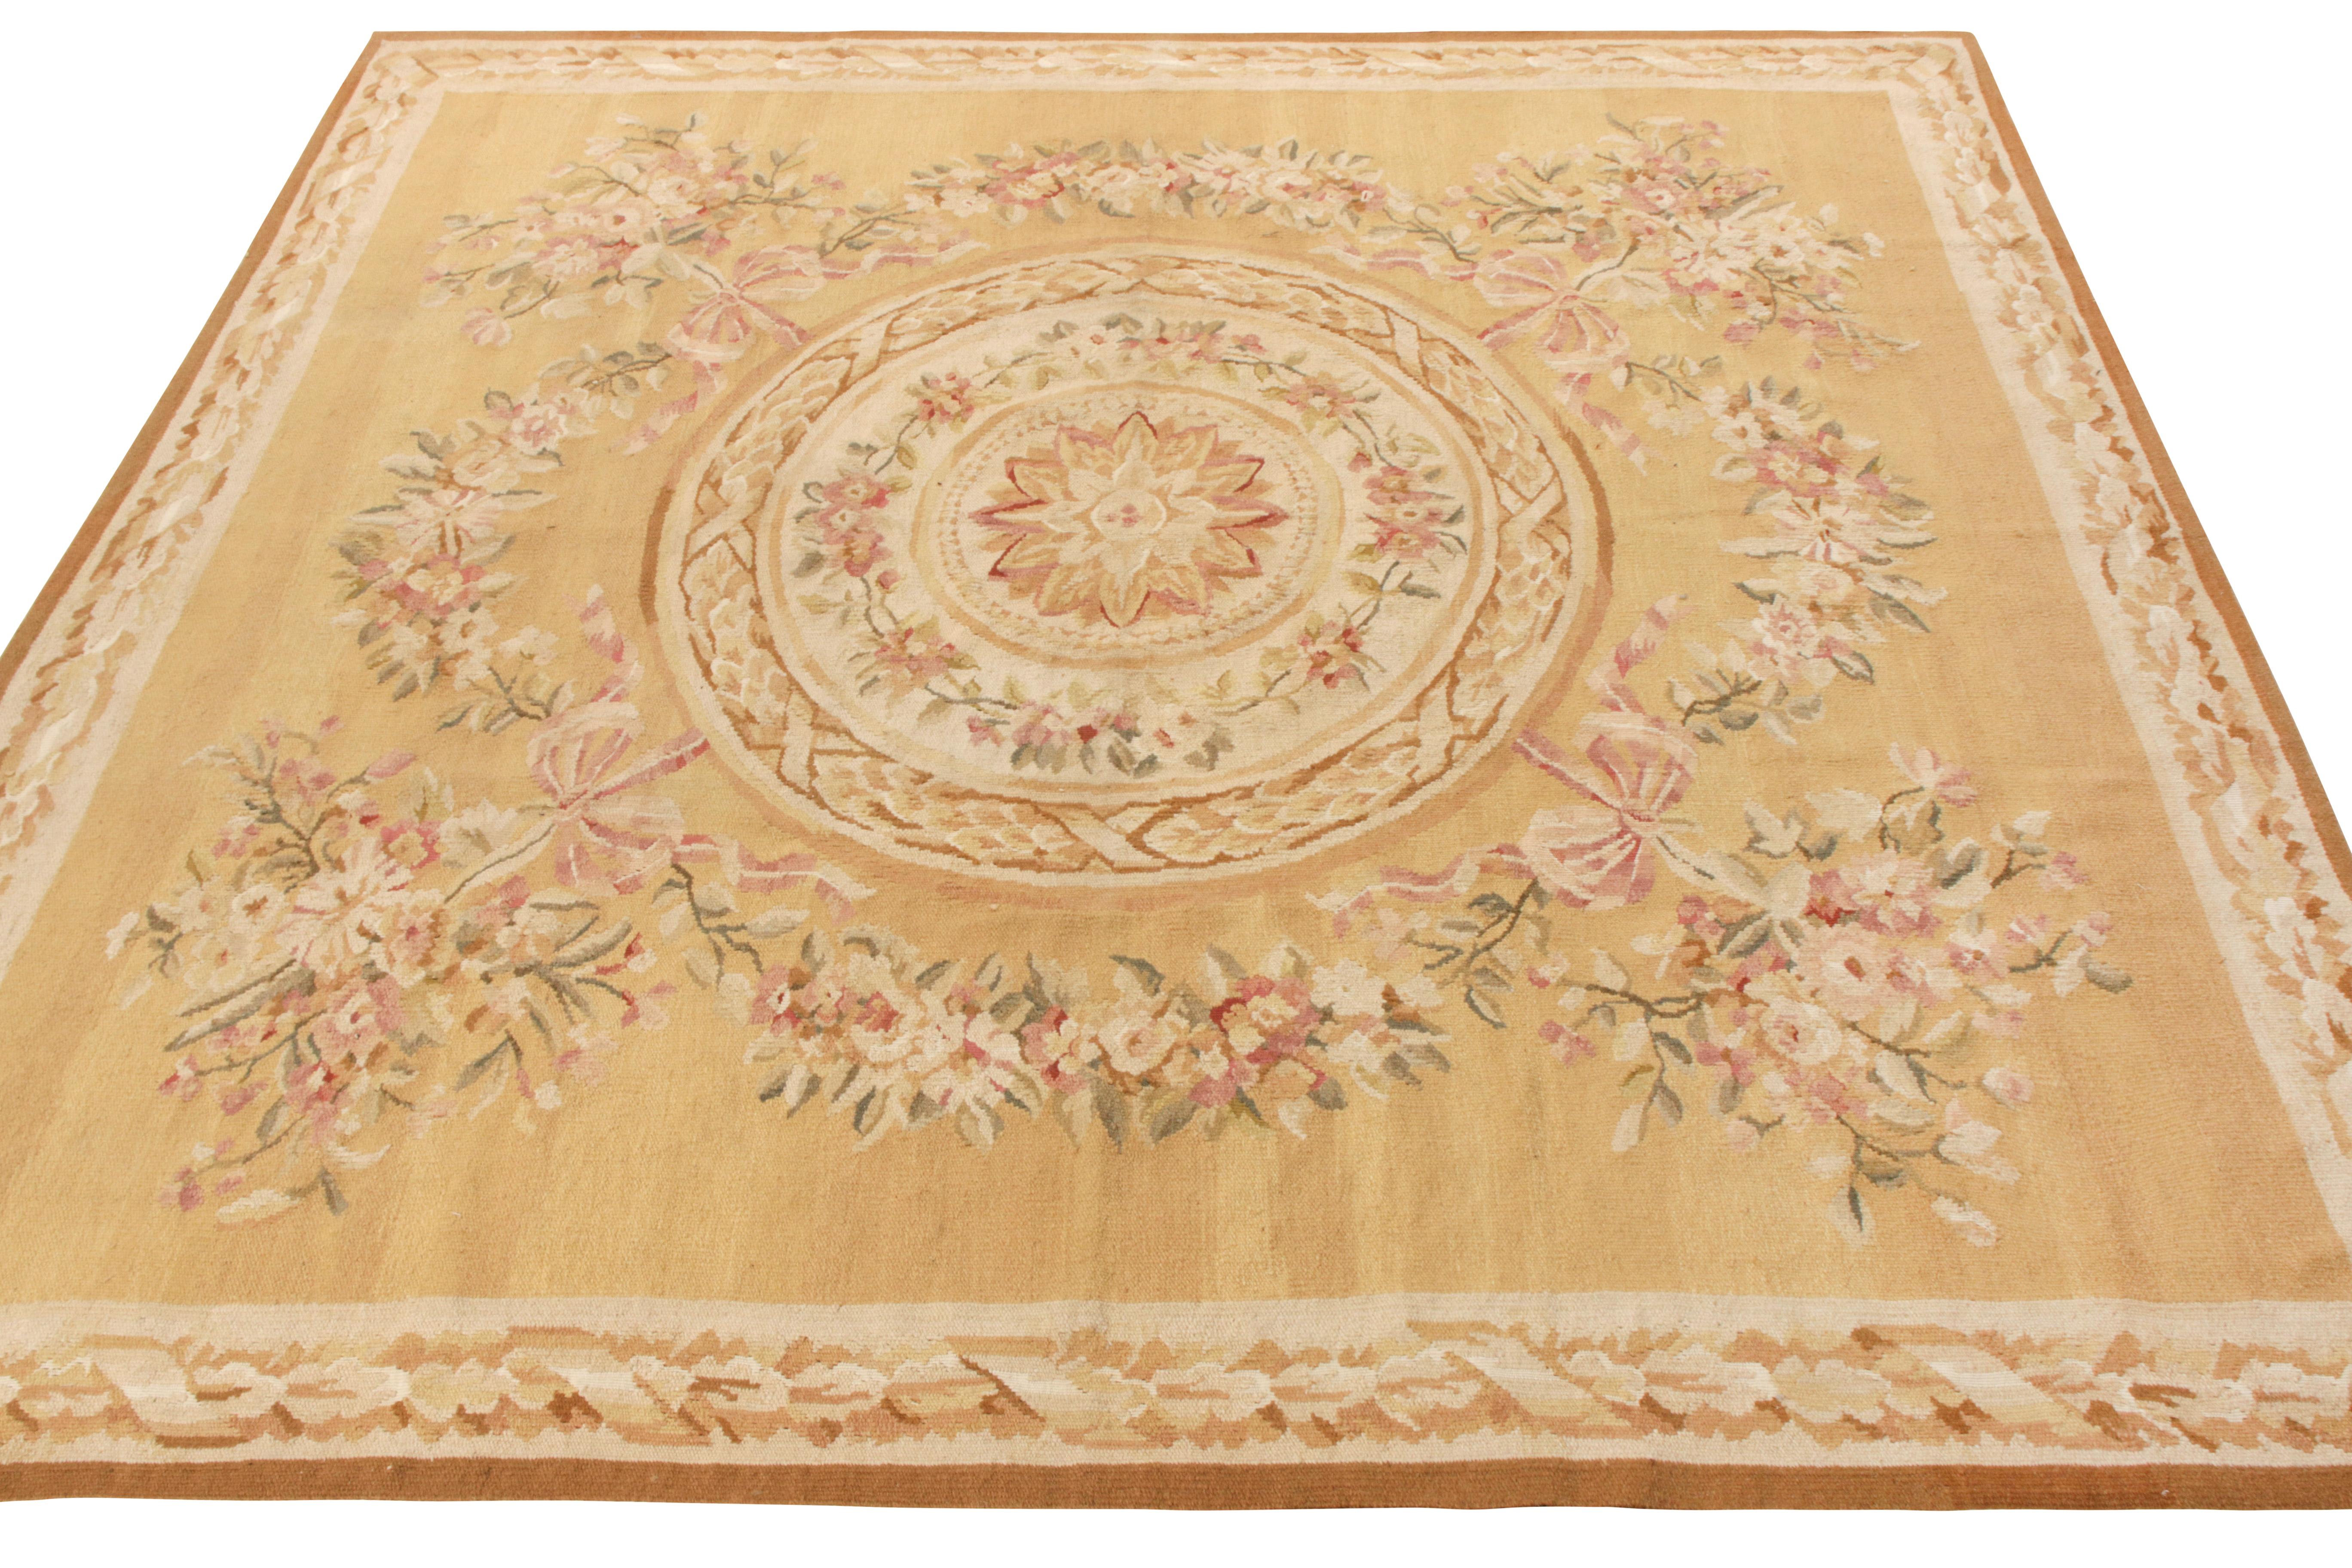 An 8x8 ode to the celebrated 18th-Century Aubusson tapestry flat weave style from Rug & Kilim’s European Collection. Handwoven in wool, this neoclassical rug inspiration enjoys a visually arresting medallion floral pattern in beige-brown, accented